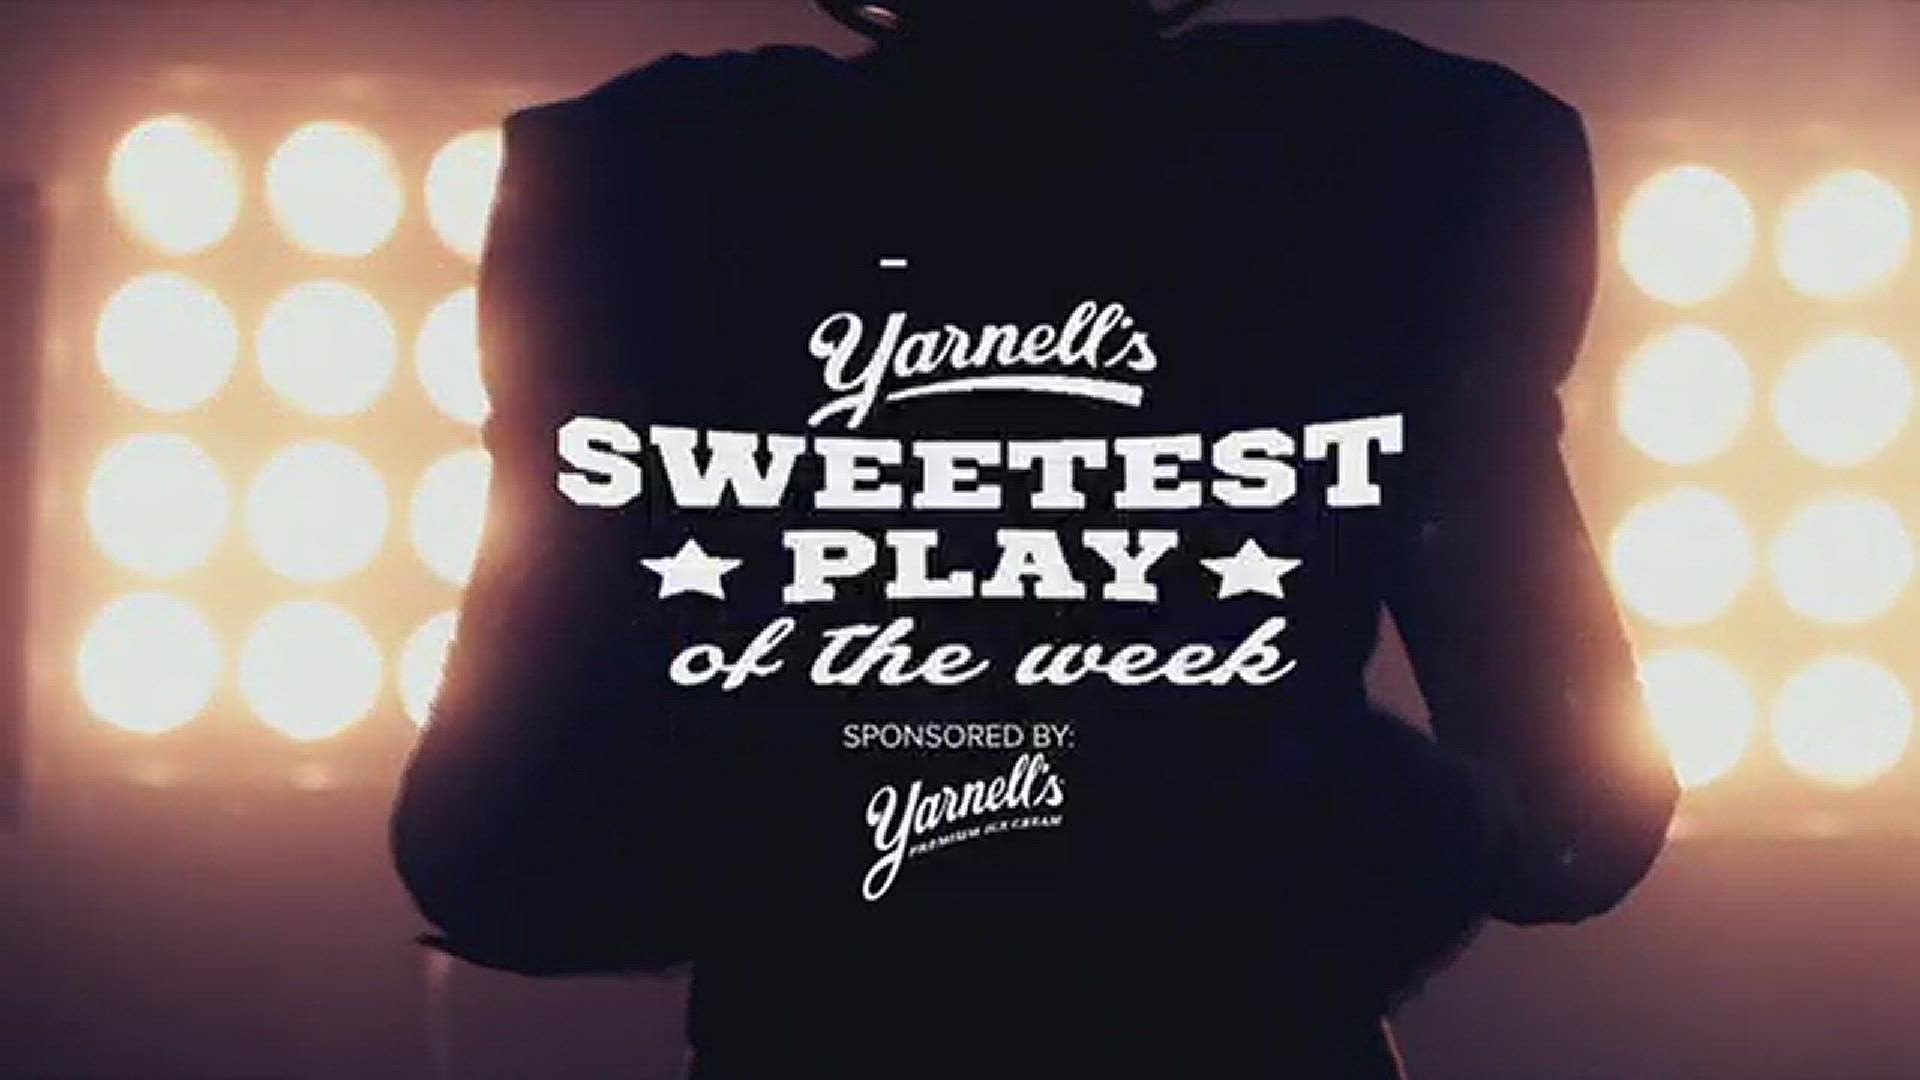 It's time to vote for Yarnell's Sweetest Play of the Week! The Winner gets an ice cream party.